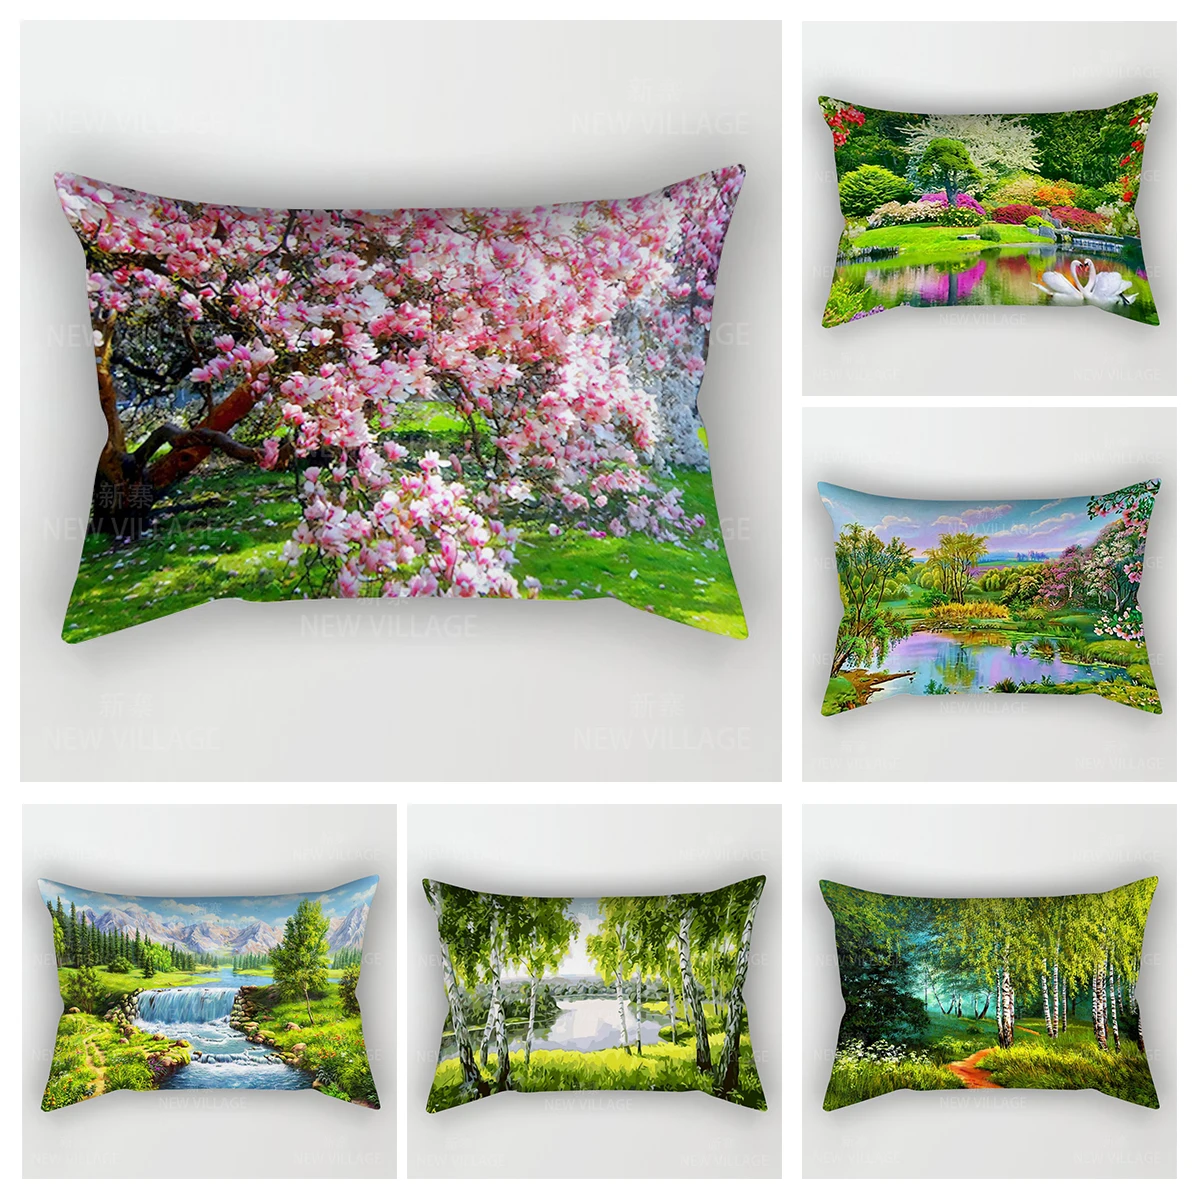 

Home autumn decoration Oil painting style pillow cushion cover decorations throw pillow cover 30*50 pillowcase 30x50 40x60 50*70